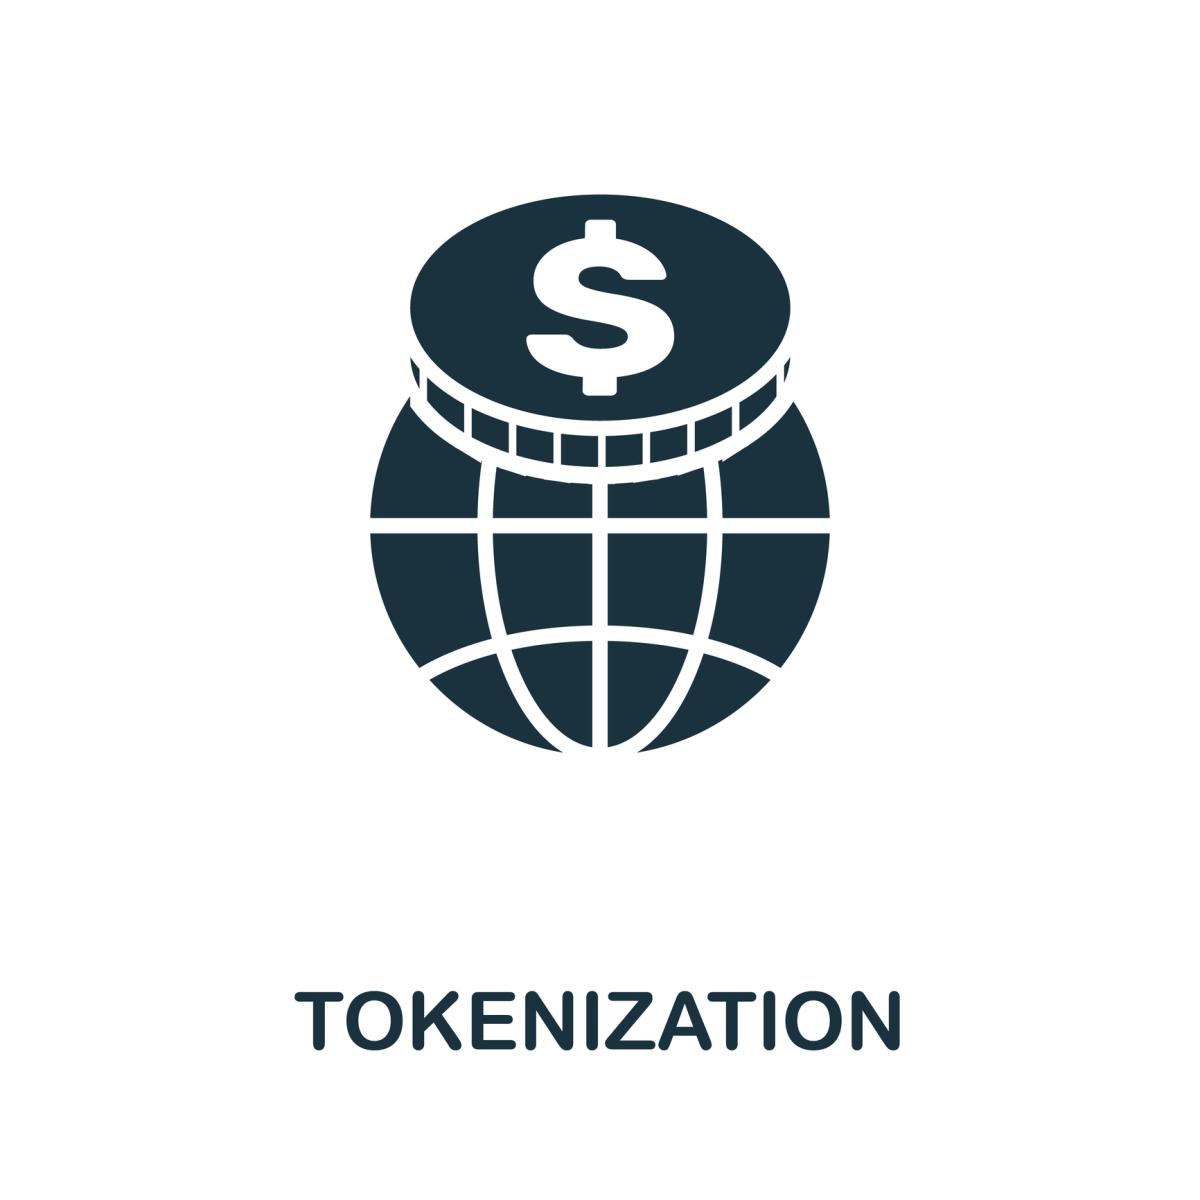 Investment Fund Tokenization for Mass Adoption or Better Distribution?